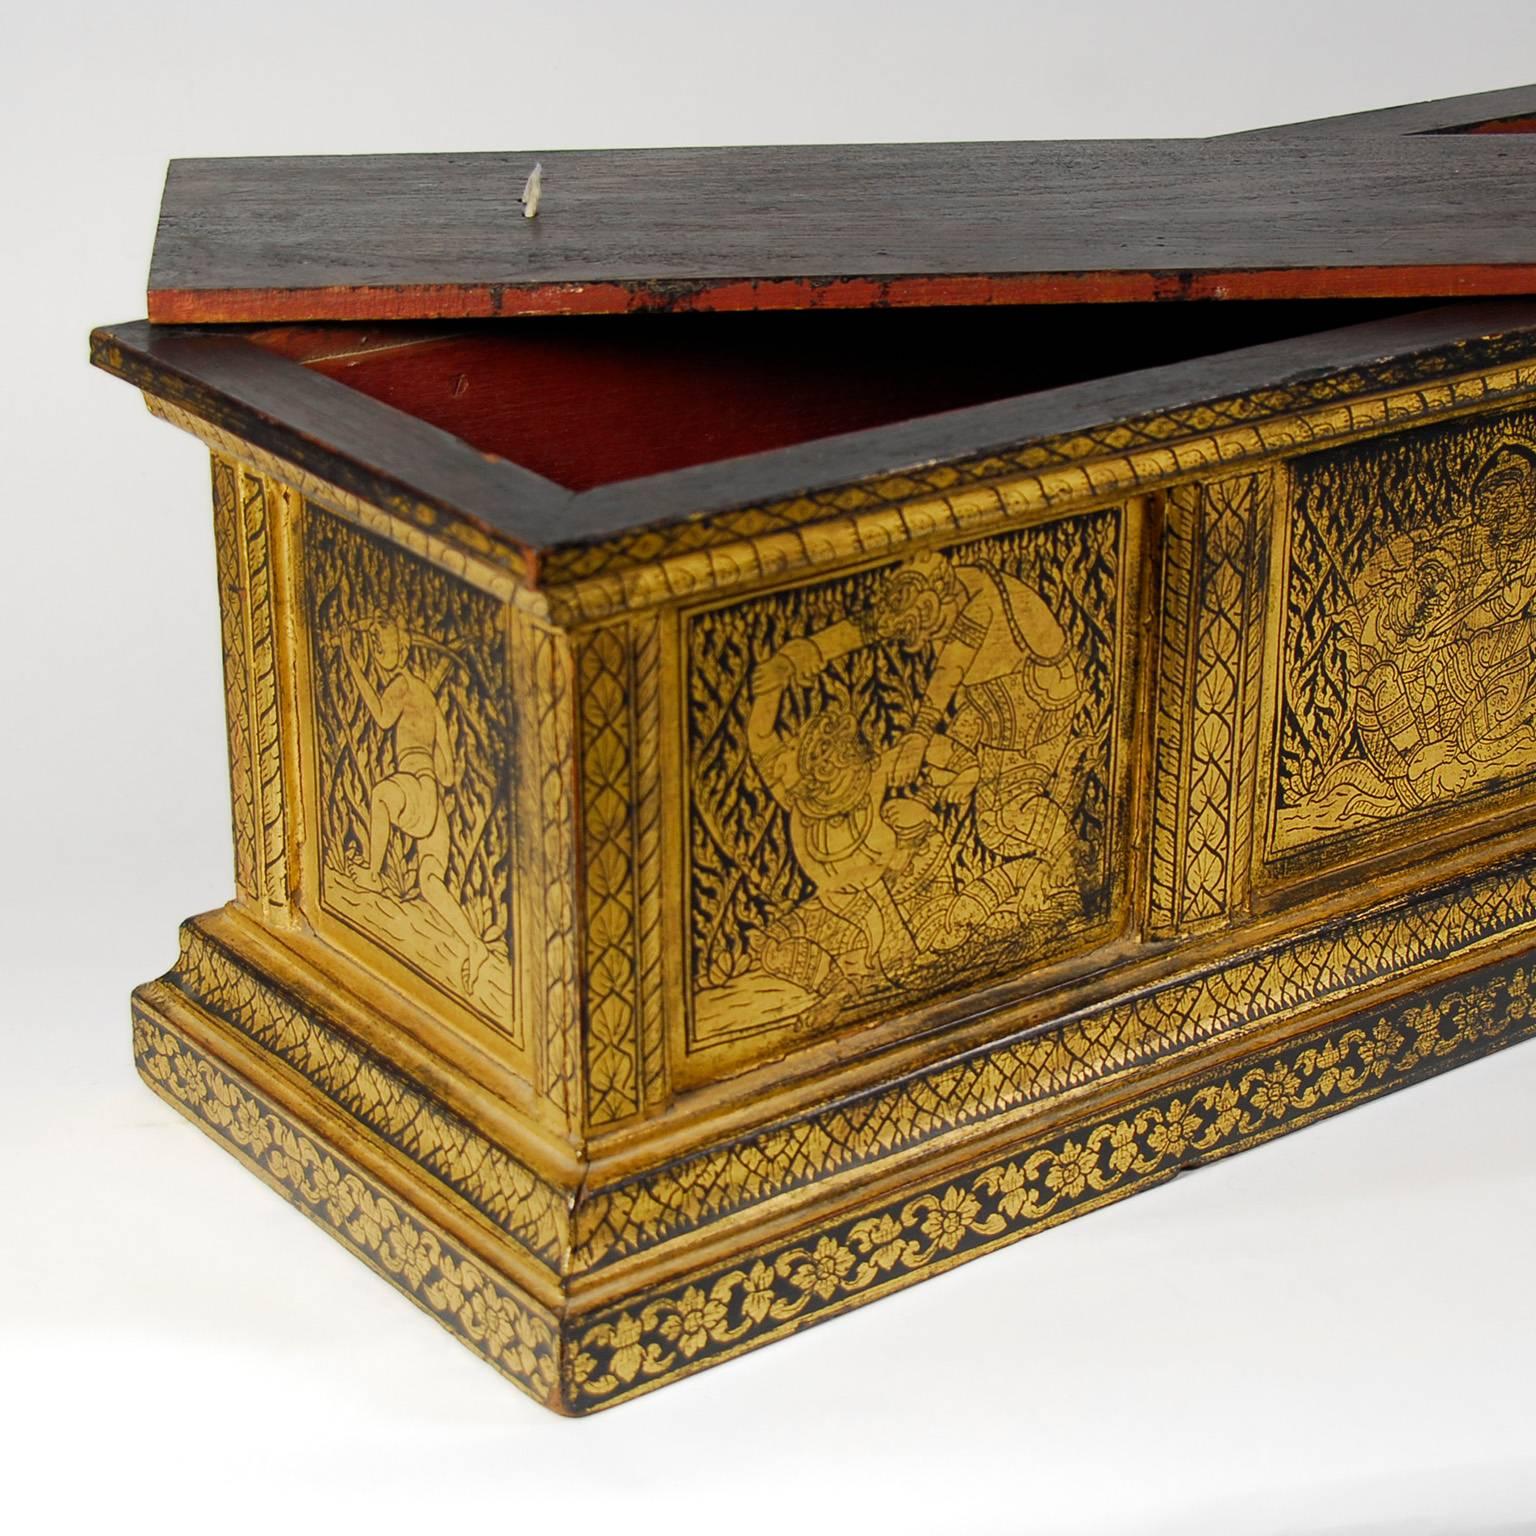 Antique thai gilt decorated manuscript box, late 19th century. Black lacquer base with ornate gilt decorative figural reserves on each side and on each end. Remove the lift top lid to reveal a red lacquer interior. Important provenance available to